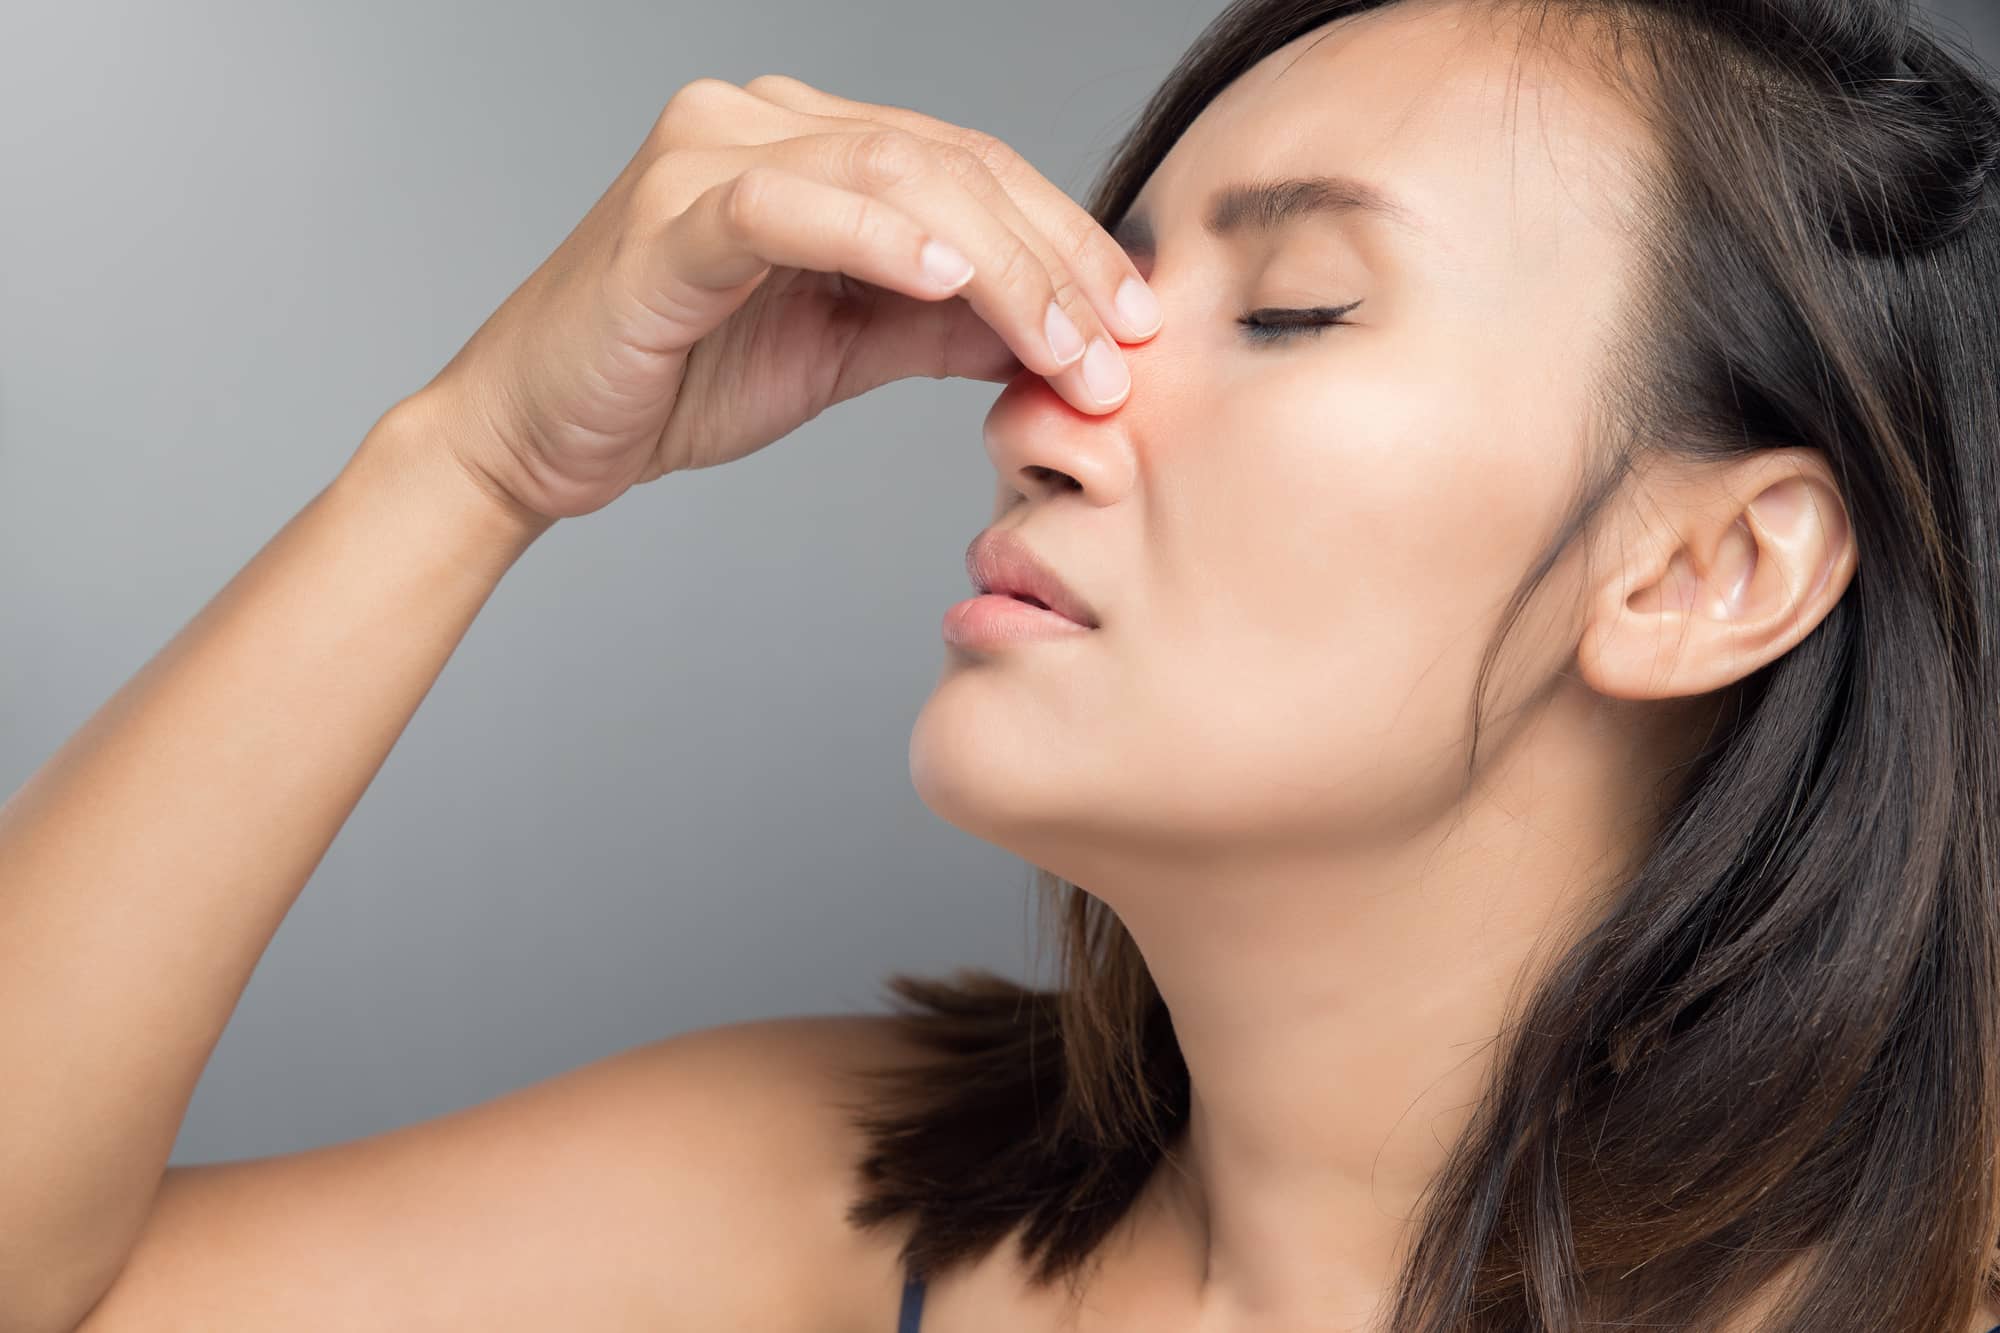 How to Stop Picking Your Nose: 4 Best Methods